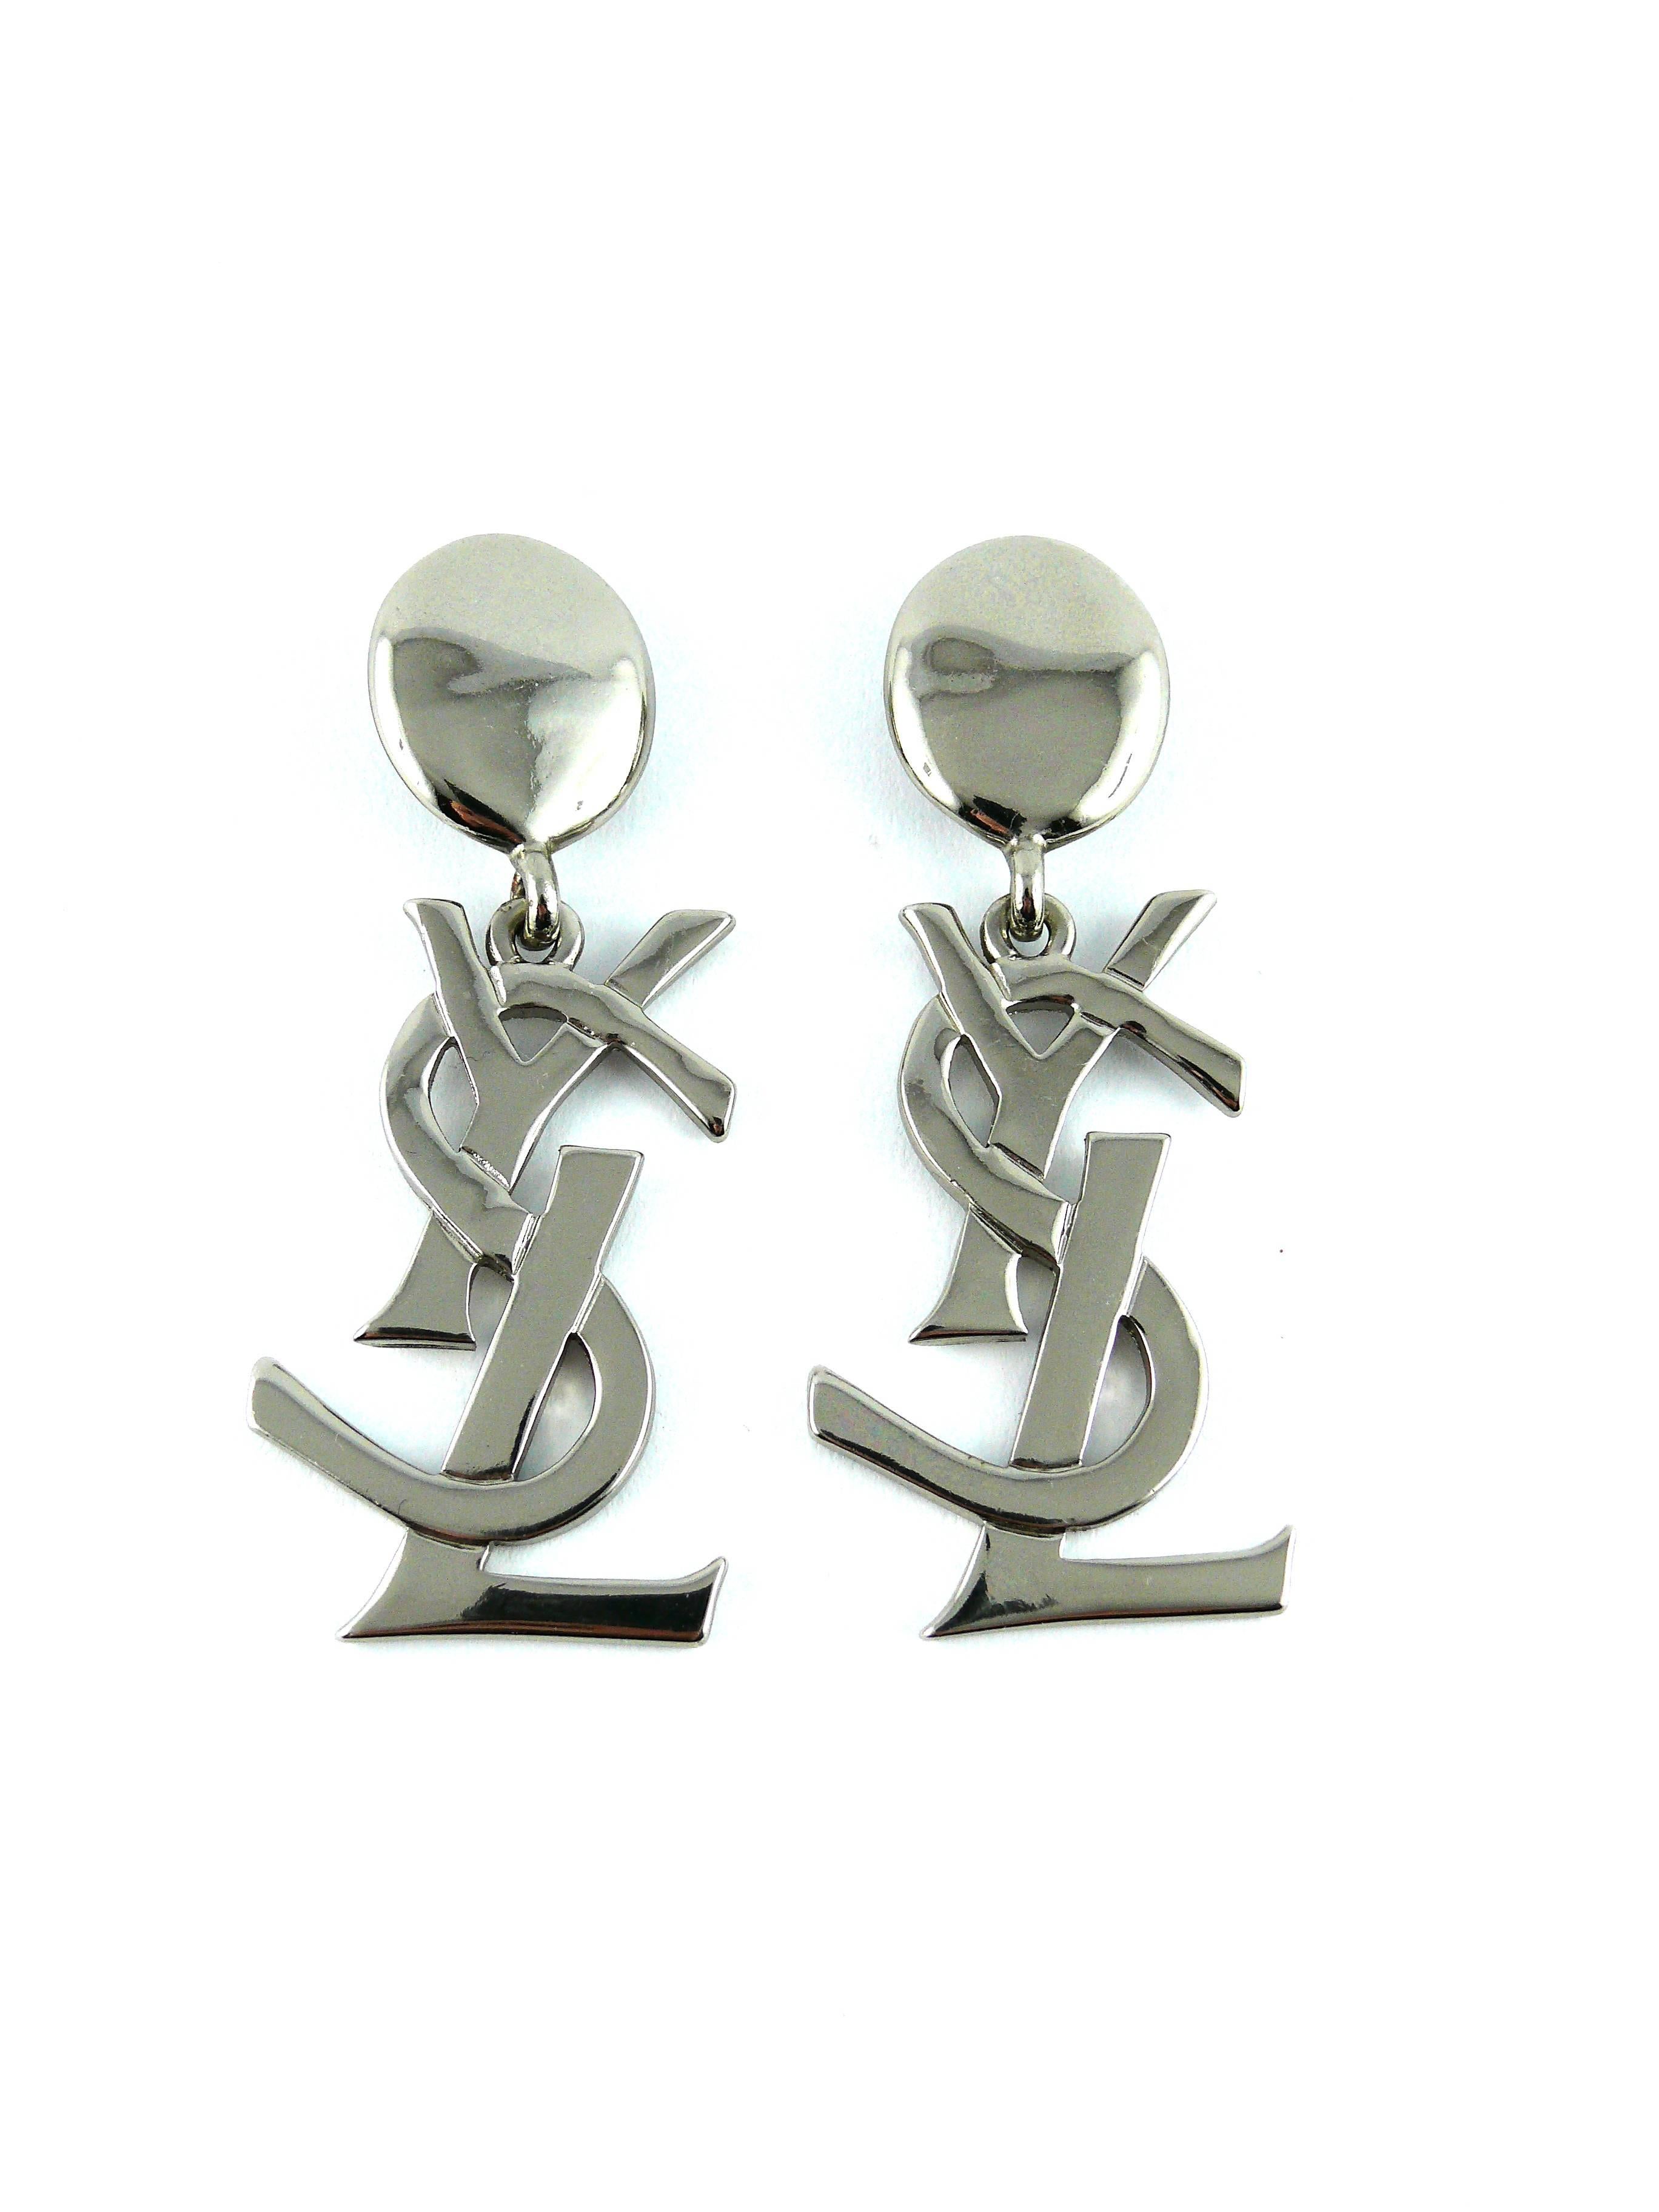 YVES SAINT LAURENT massive vintage silver tone iconic logo dangling earrings (clip on).

Rare and collectable item !
As seen on Samantha Jones (Kim Cattrall) in SATC 2.

Marked YSL Made in France.

Comes with original box (used).

Note
As